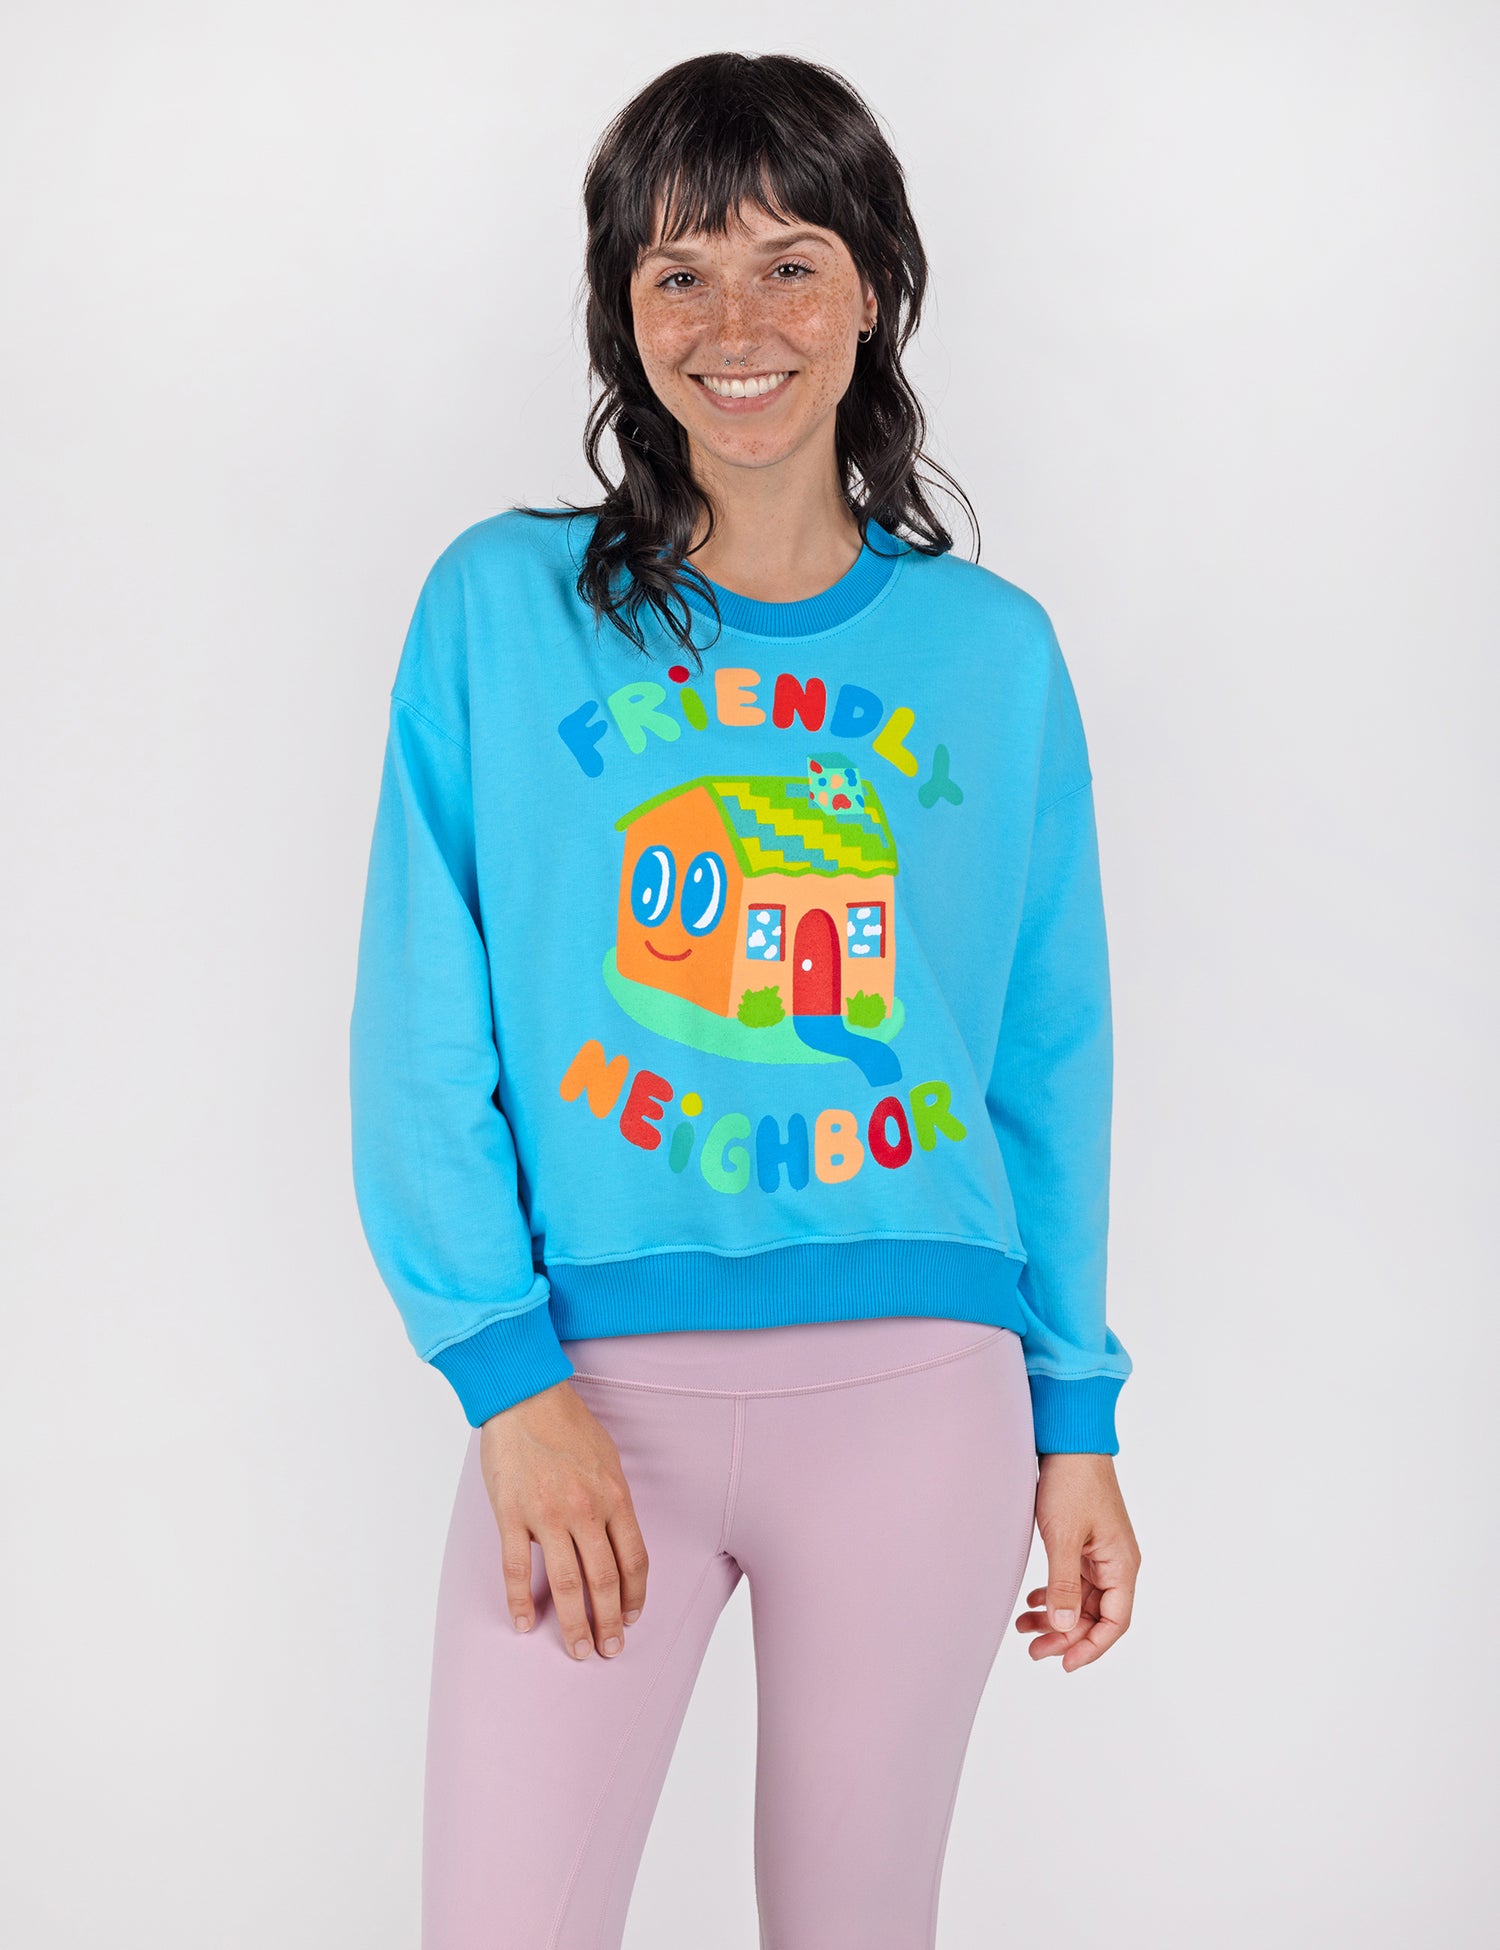 Woman wearing a blue crop crew sweatshirt with colorful letters and house design